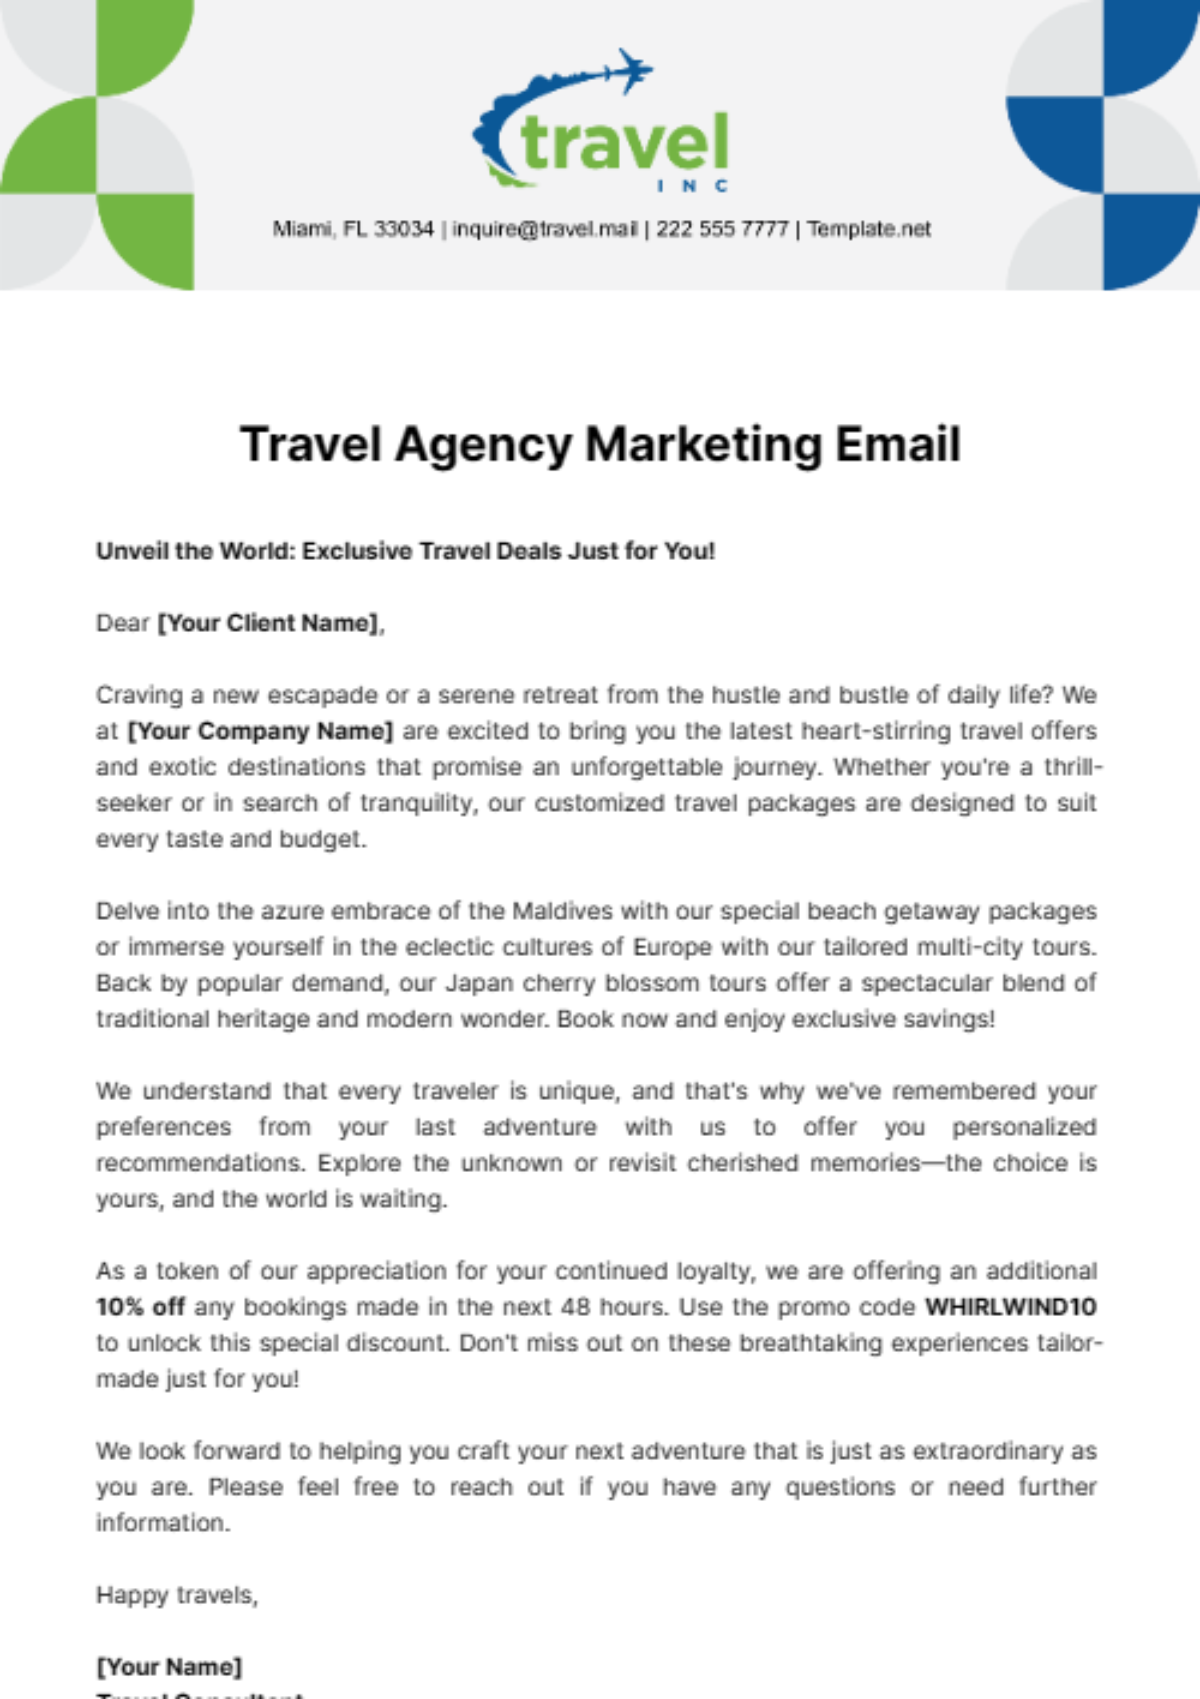 Free Travel Agency Marketing Email Template